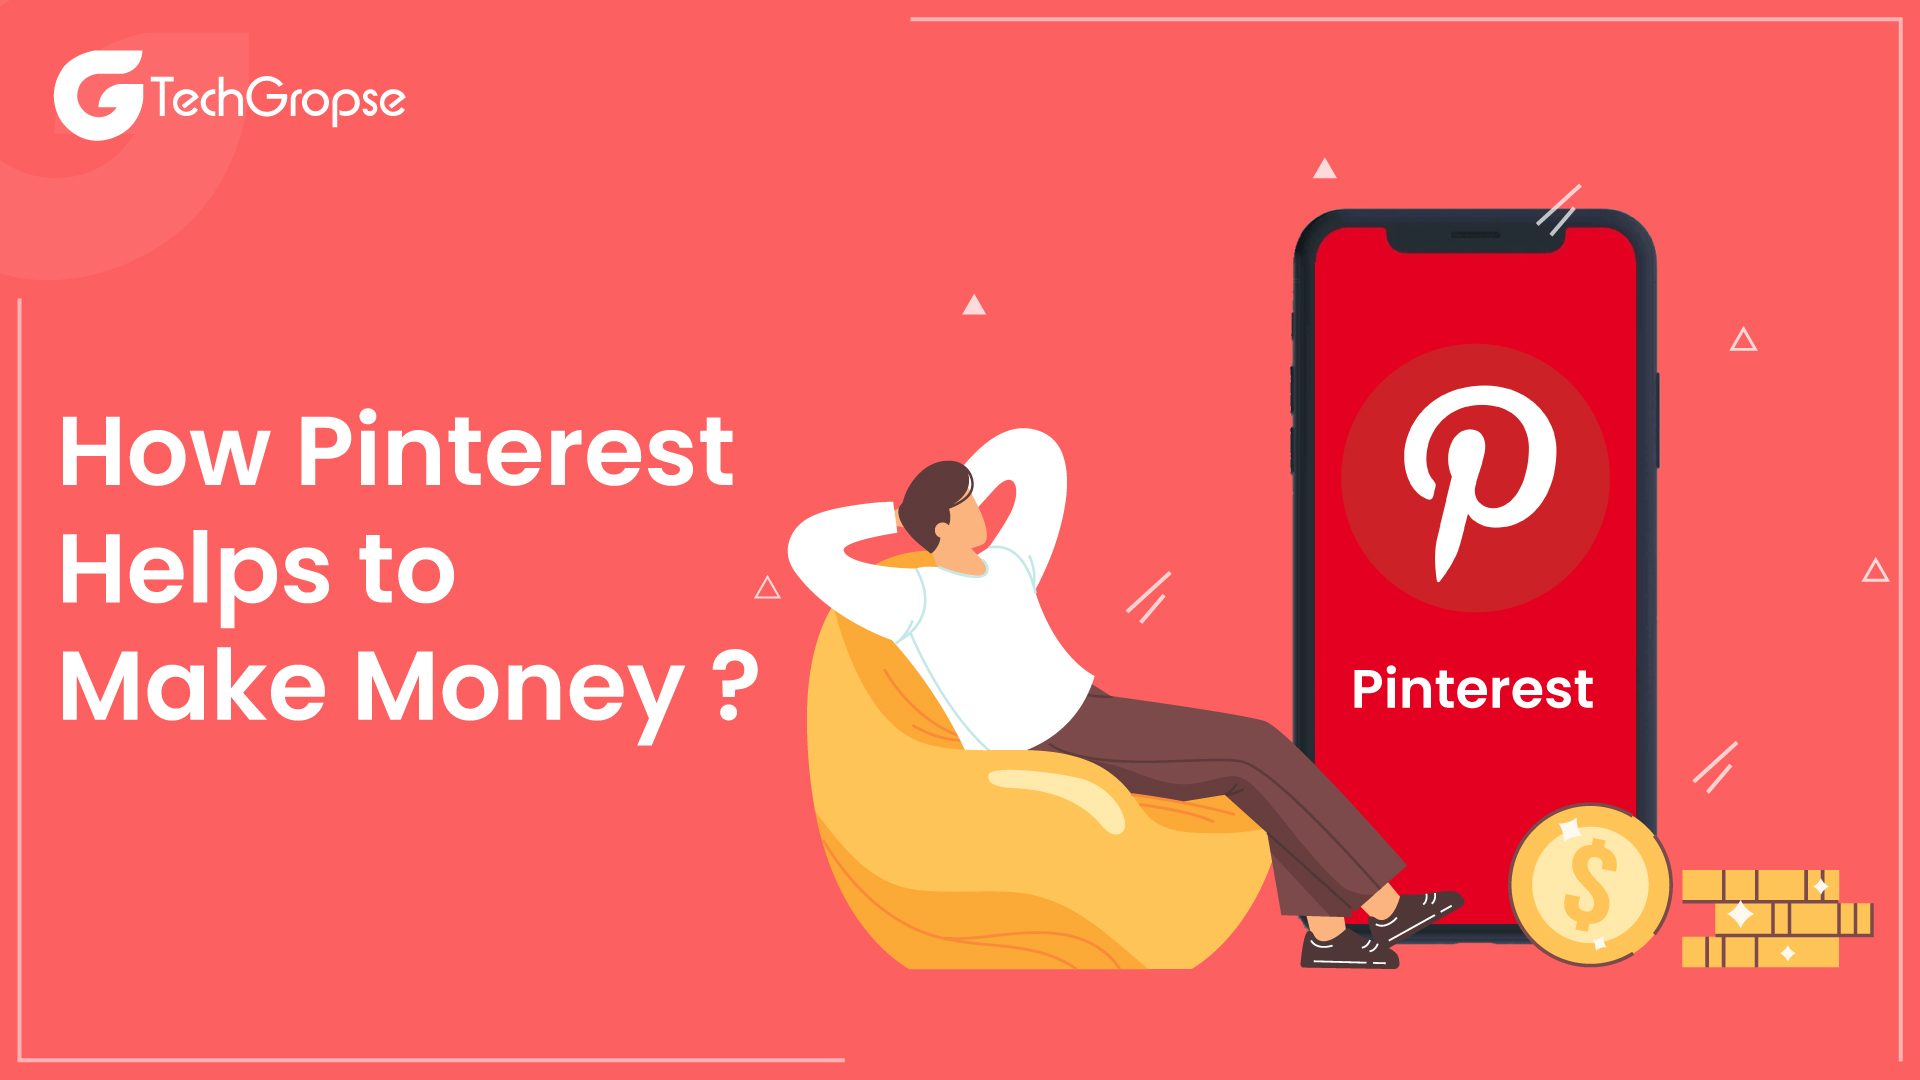 How Pinterest Helps to Make Money